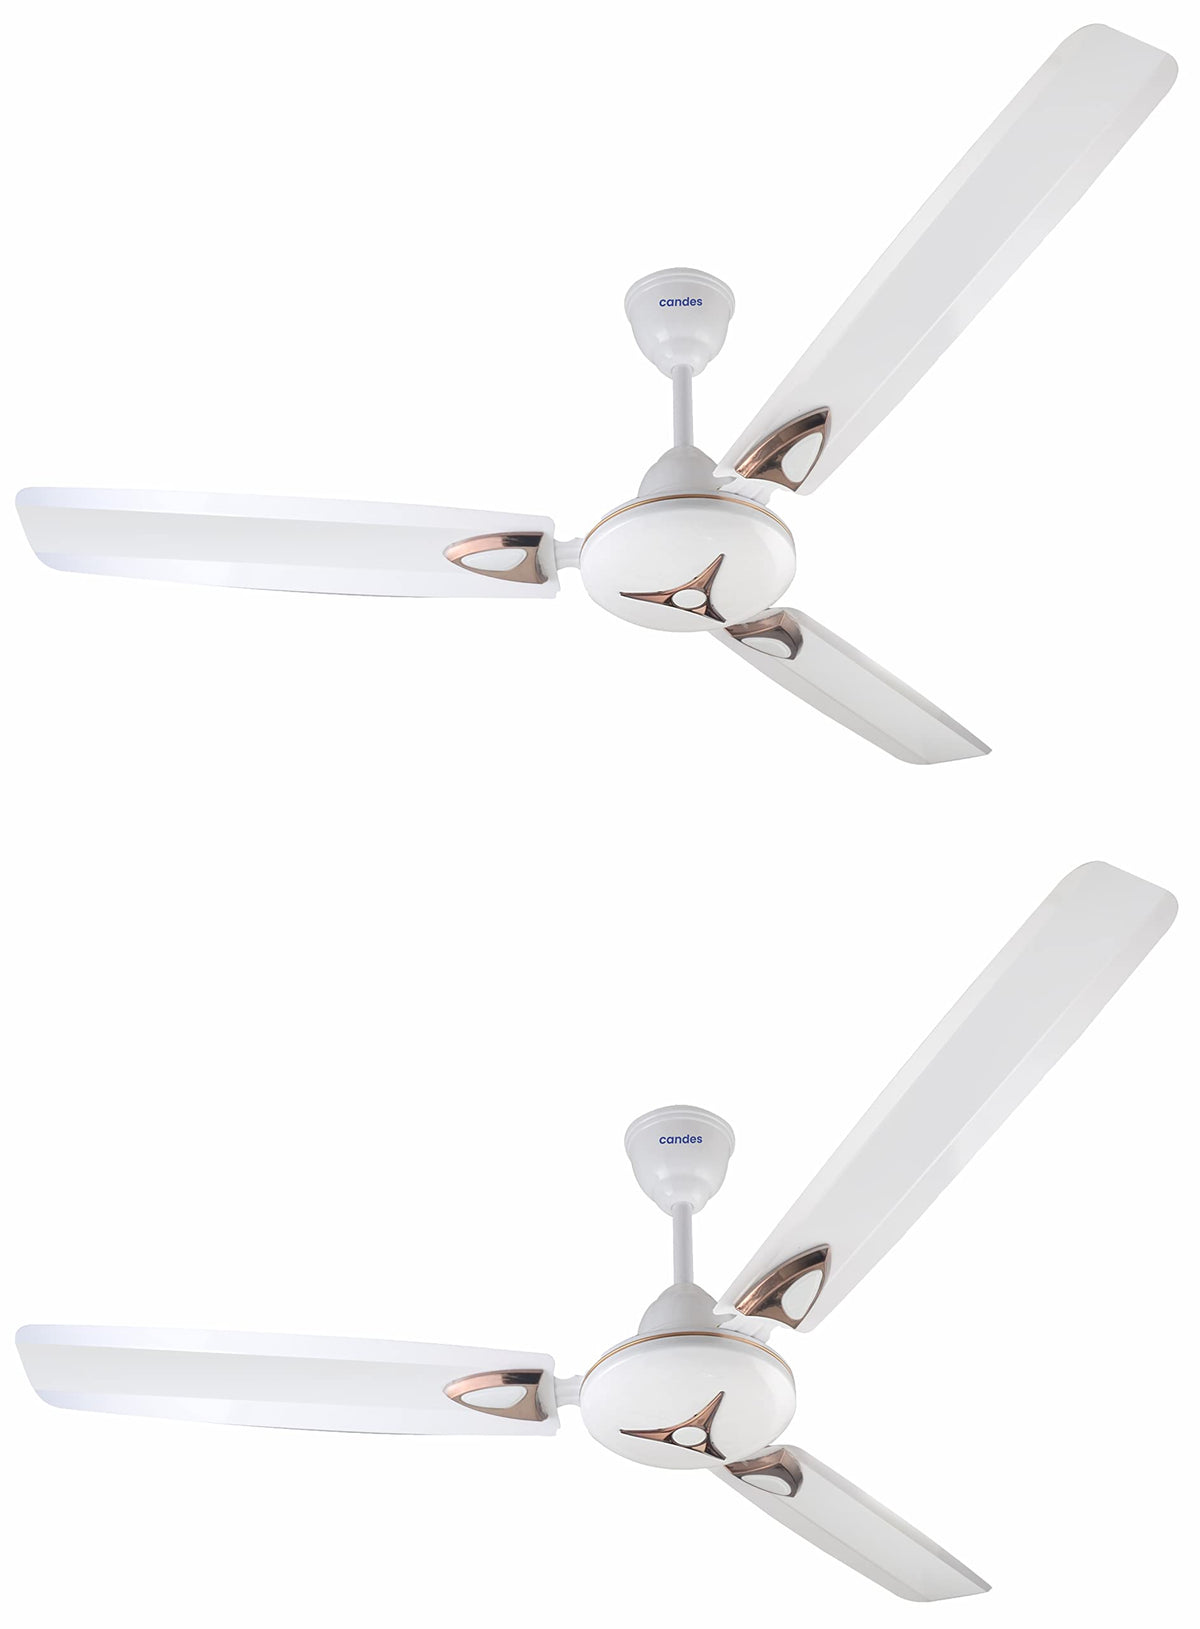 Candes Star1200mm High-Speed Decorative Ceiling Fans for Home - group (Pack of 2)